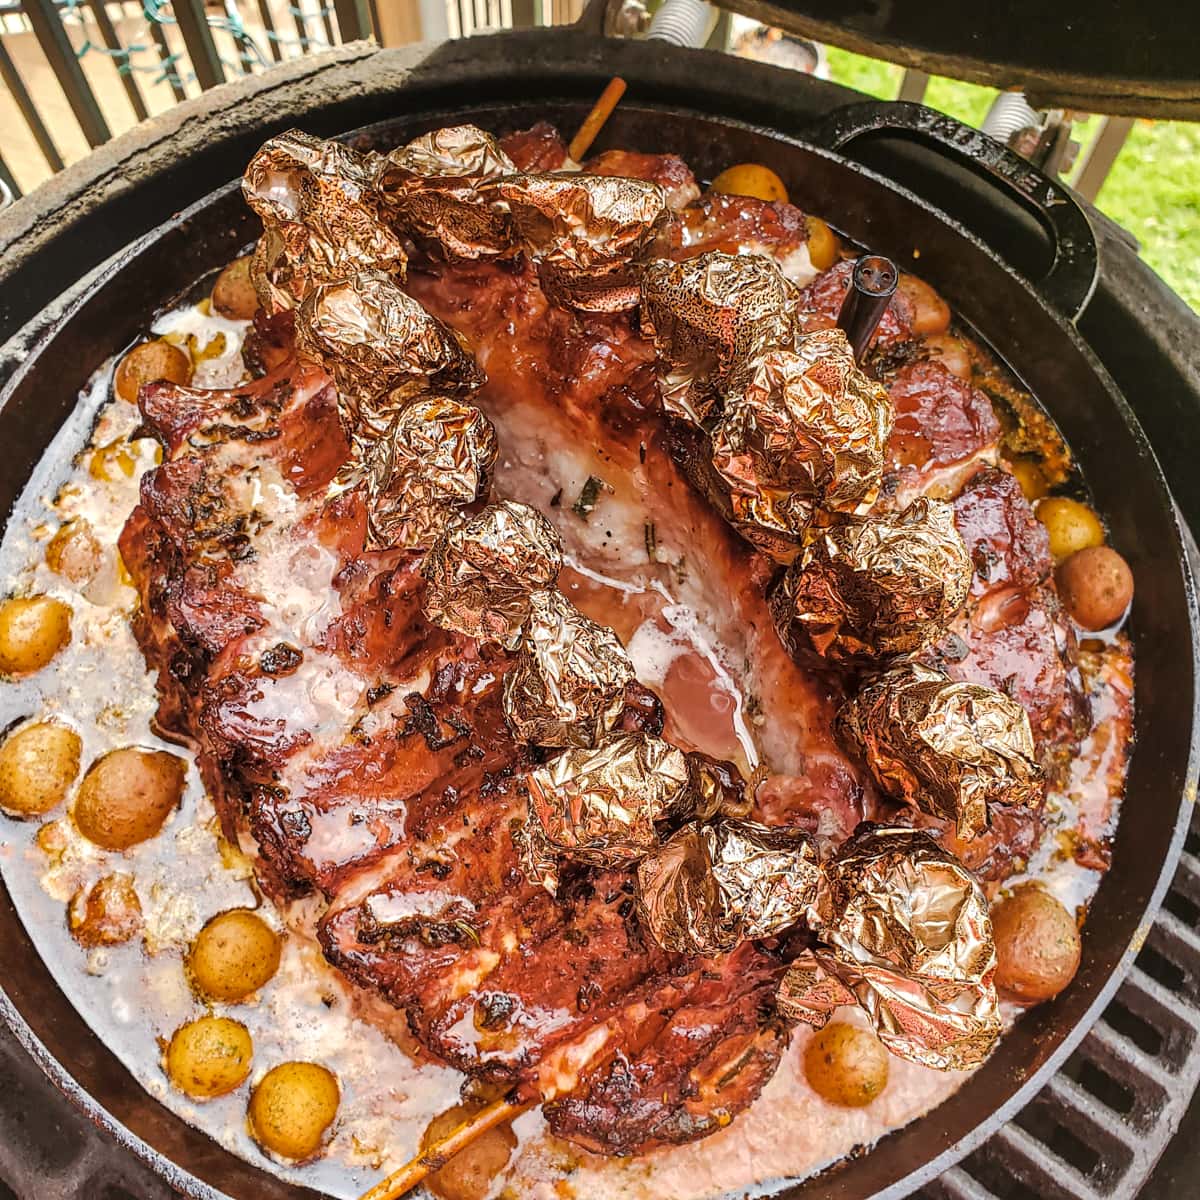 Crown of pork cooking on a Big Green Egg.